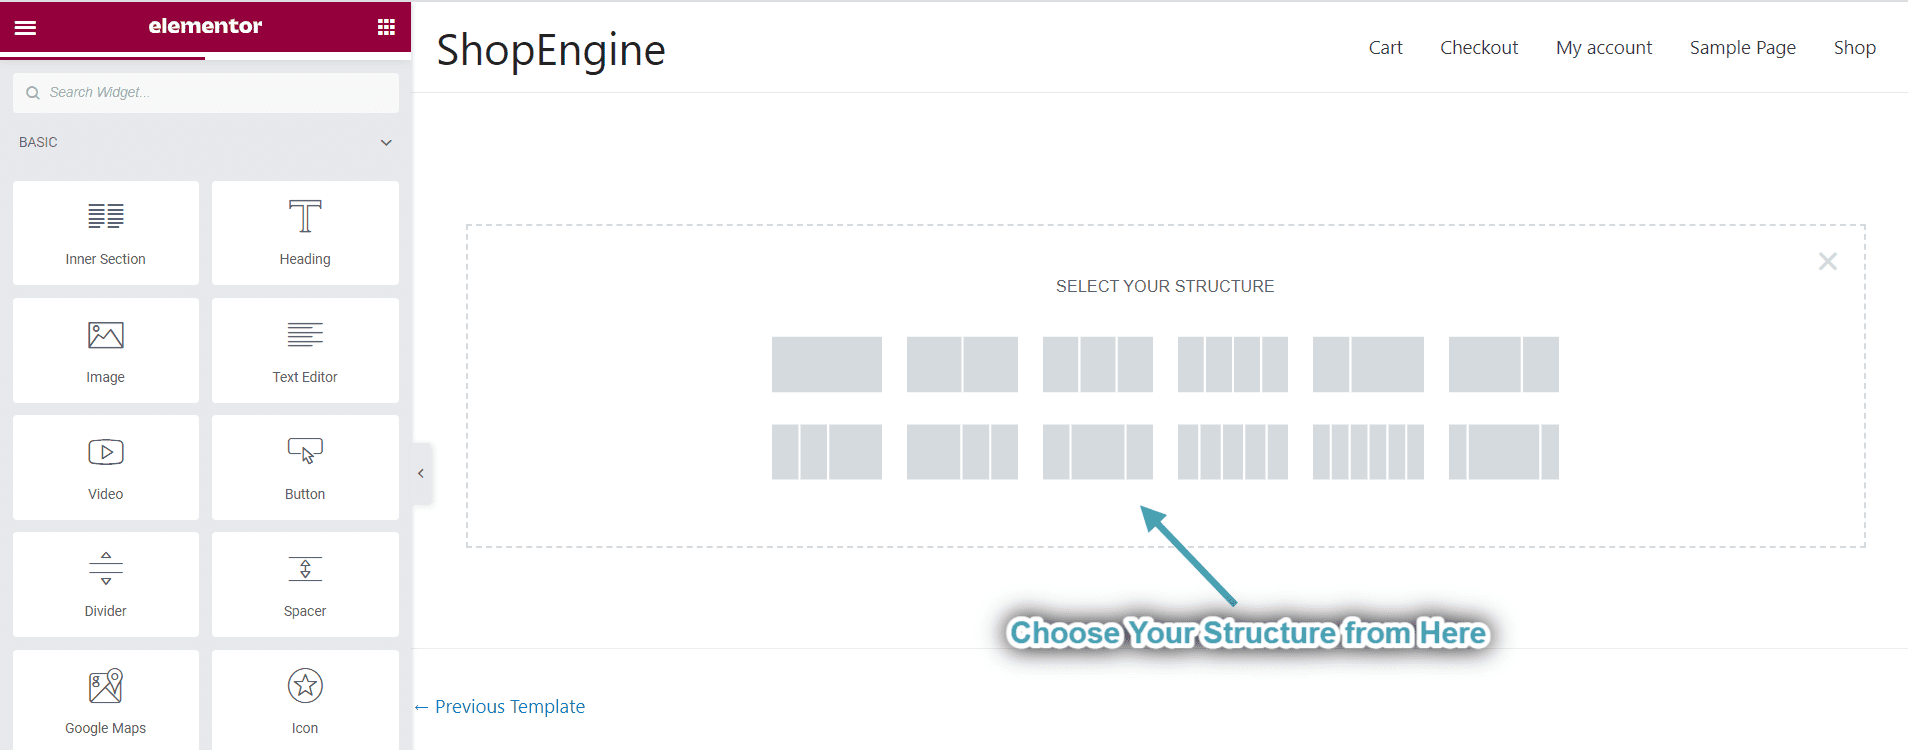 Select your structure for single product page